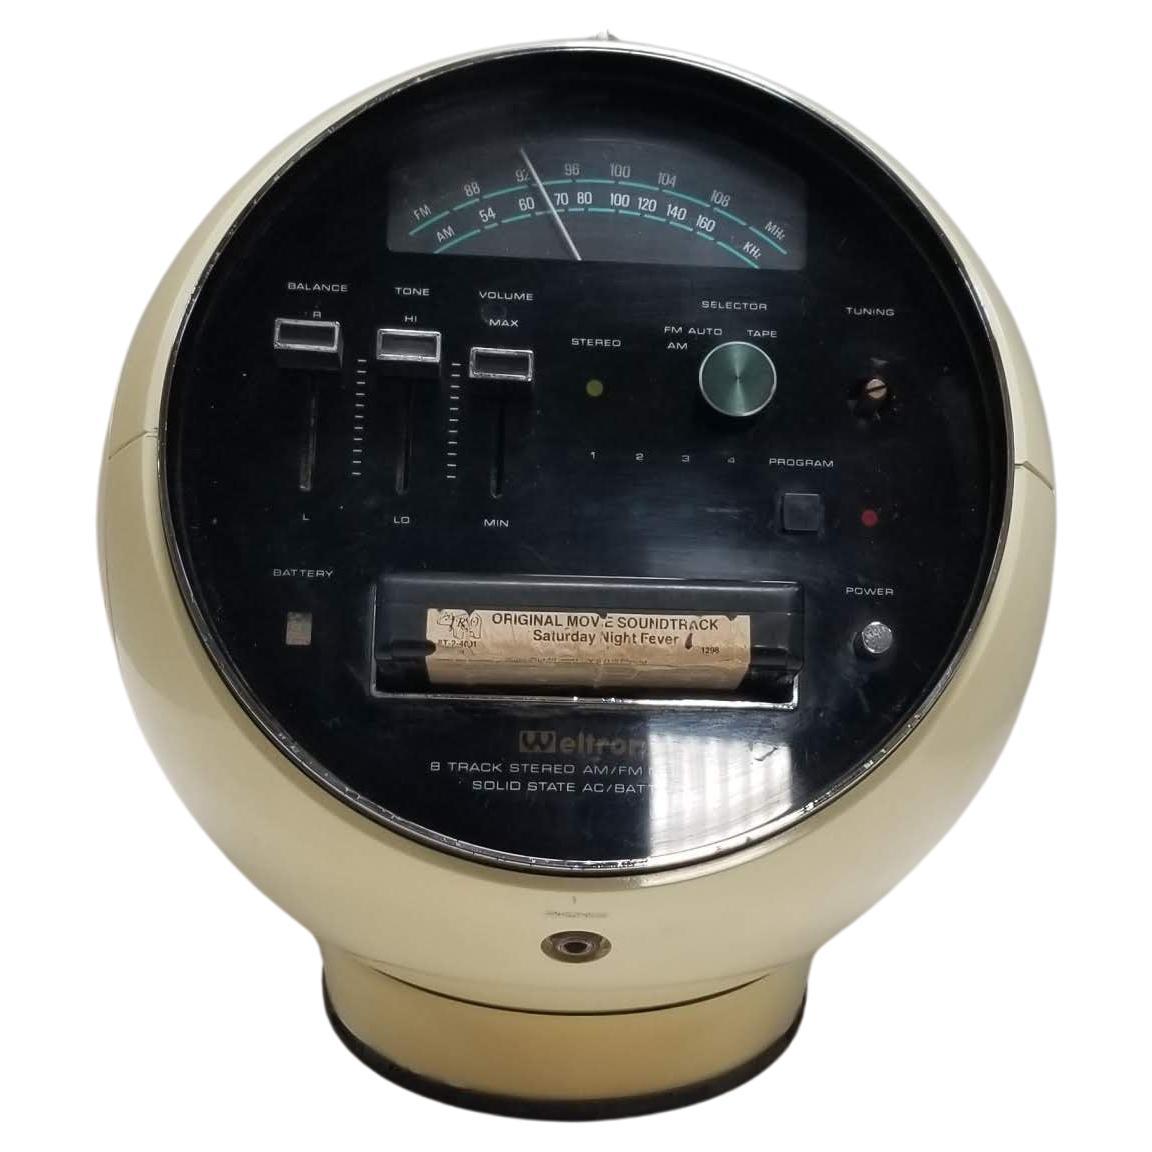 Weltron Modell 2001 Space Ball, AM/FM Radio 8 Spur Stereo